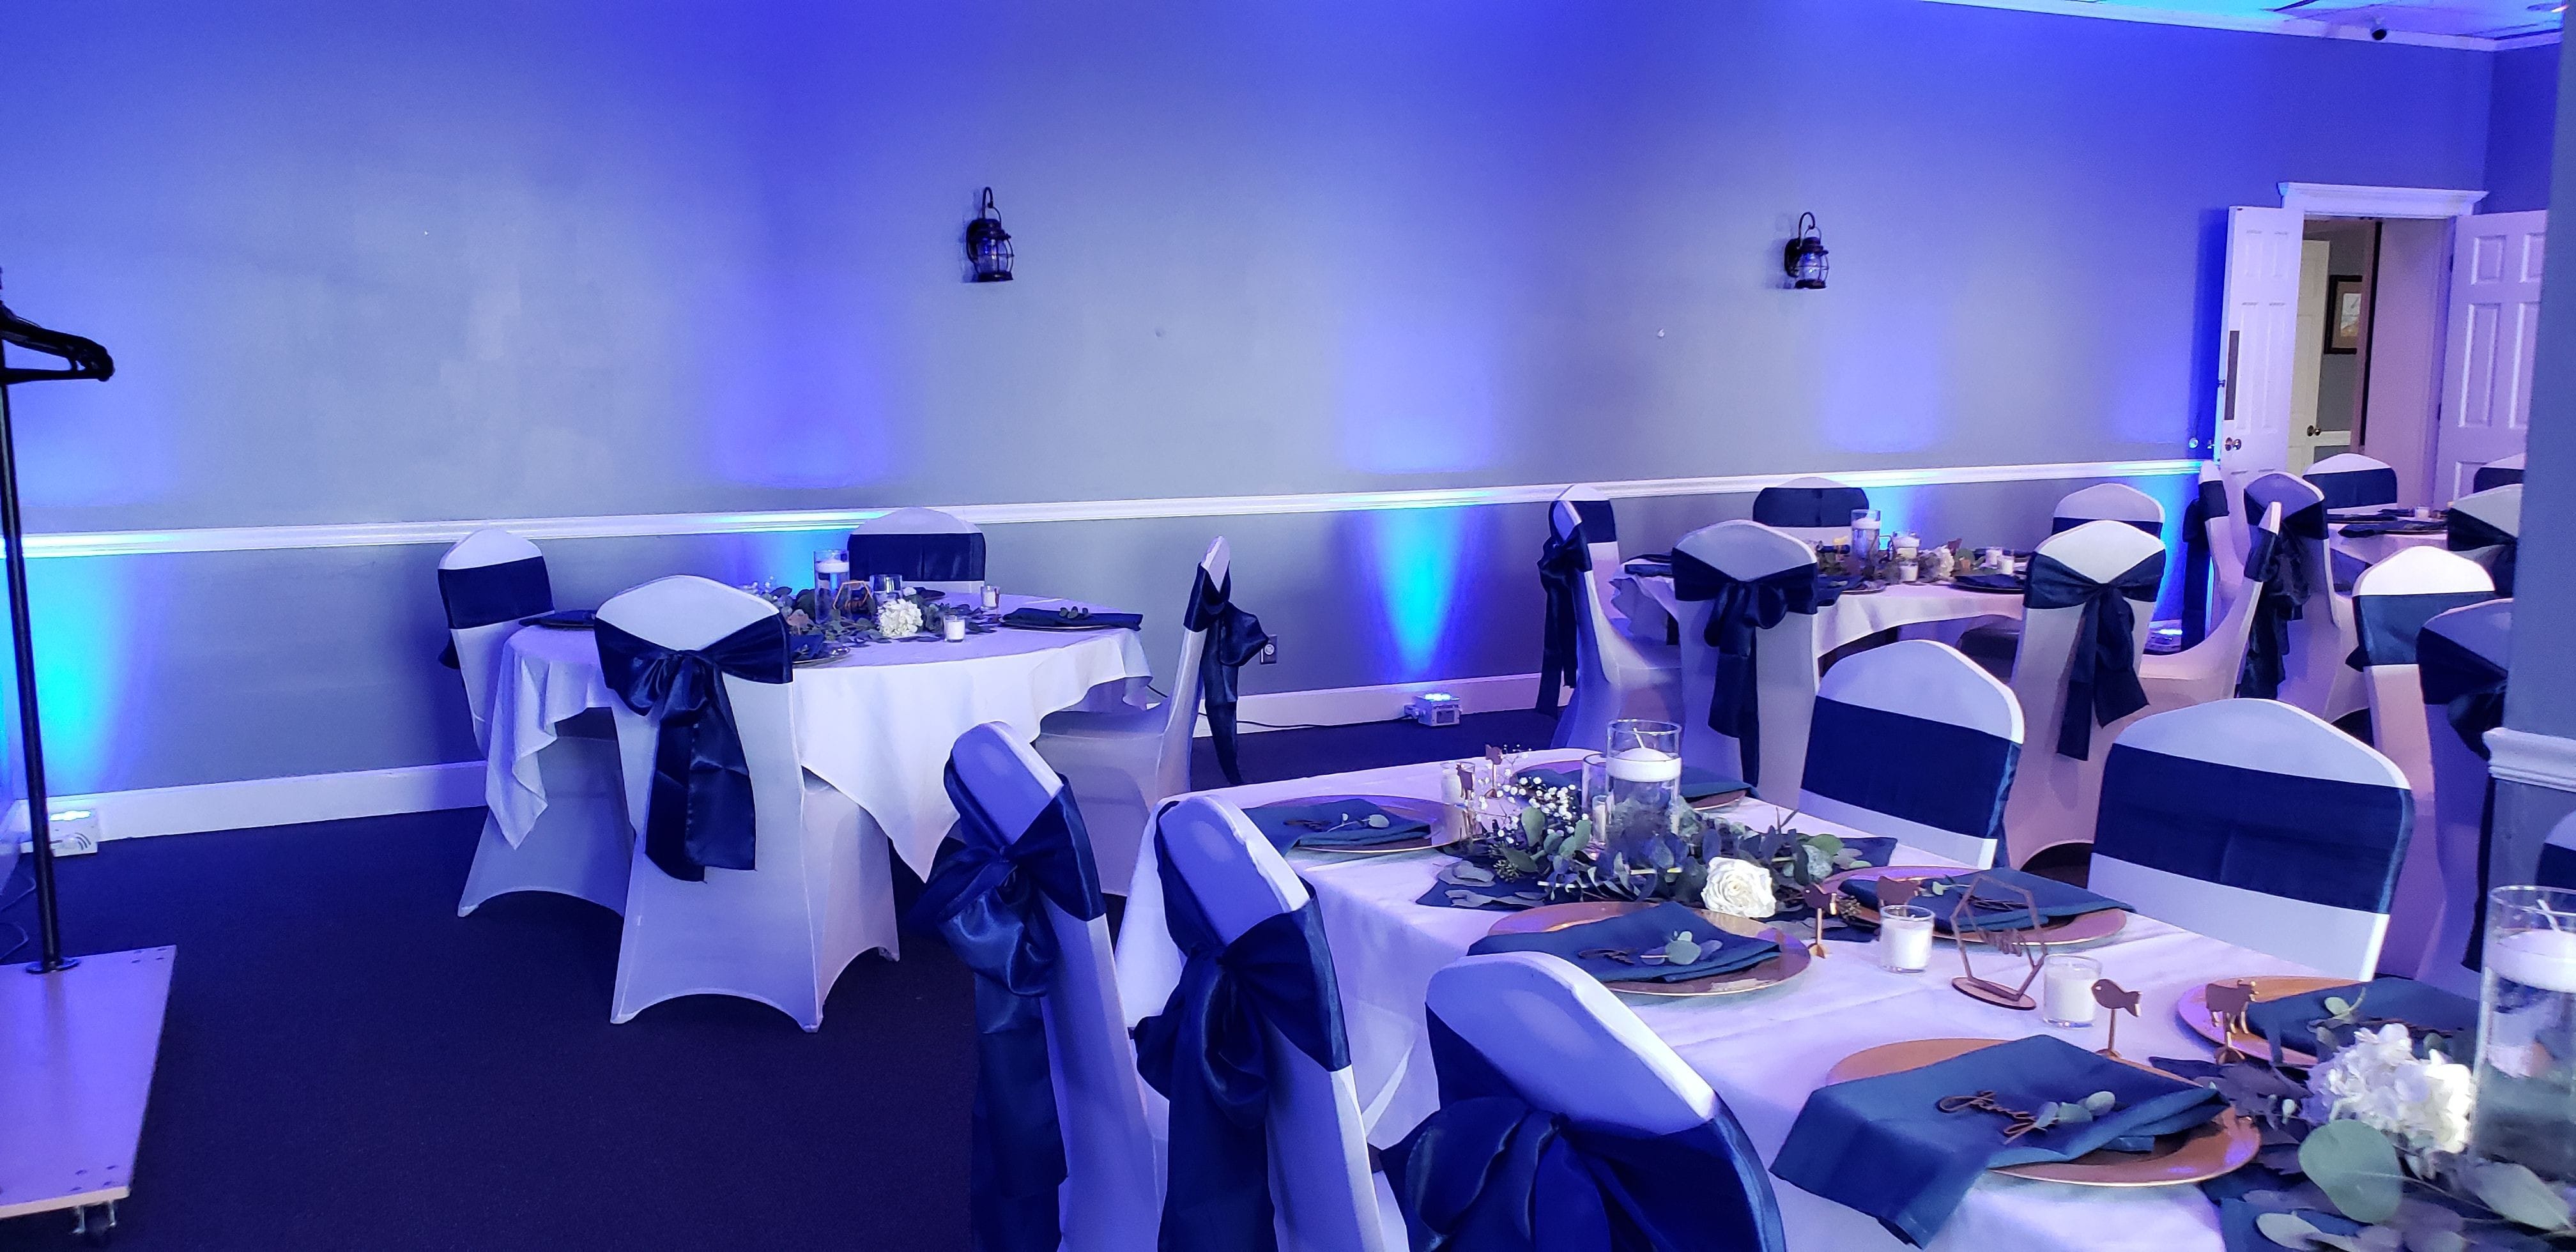 Wedding lighting at the Boat Club in Fitger's with blue up lighting by Duluth Event Lighting.